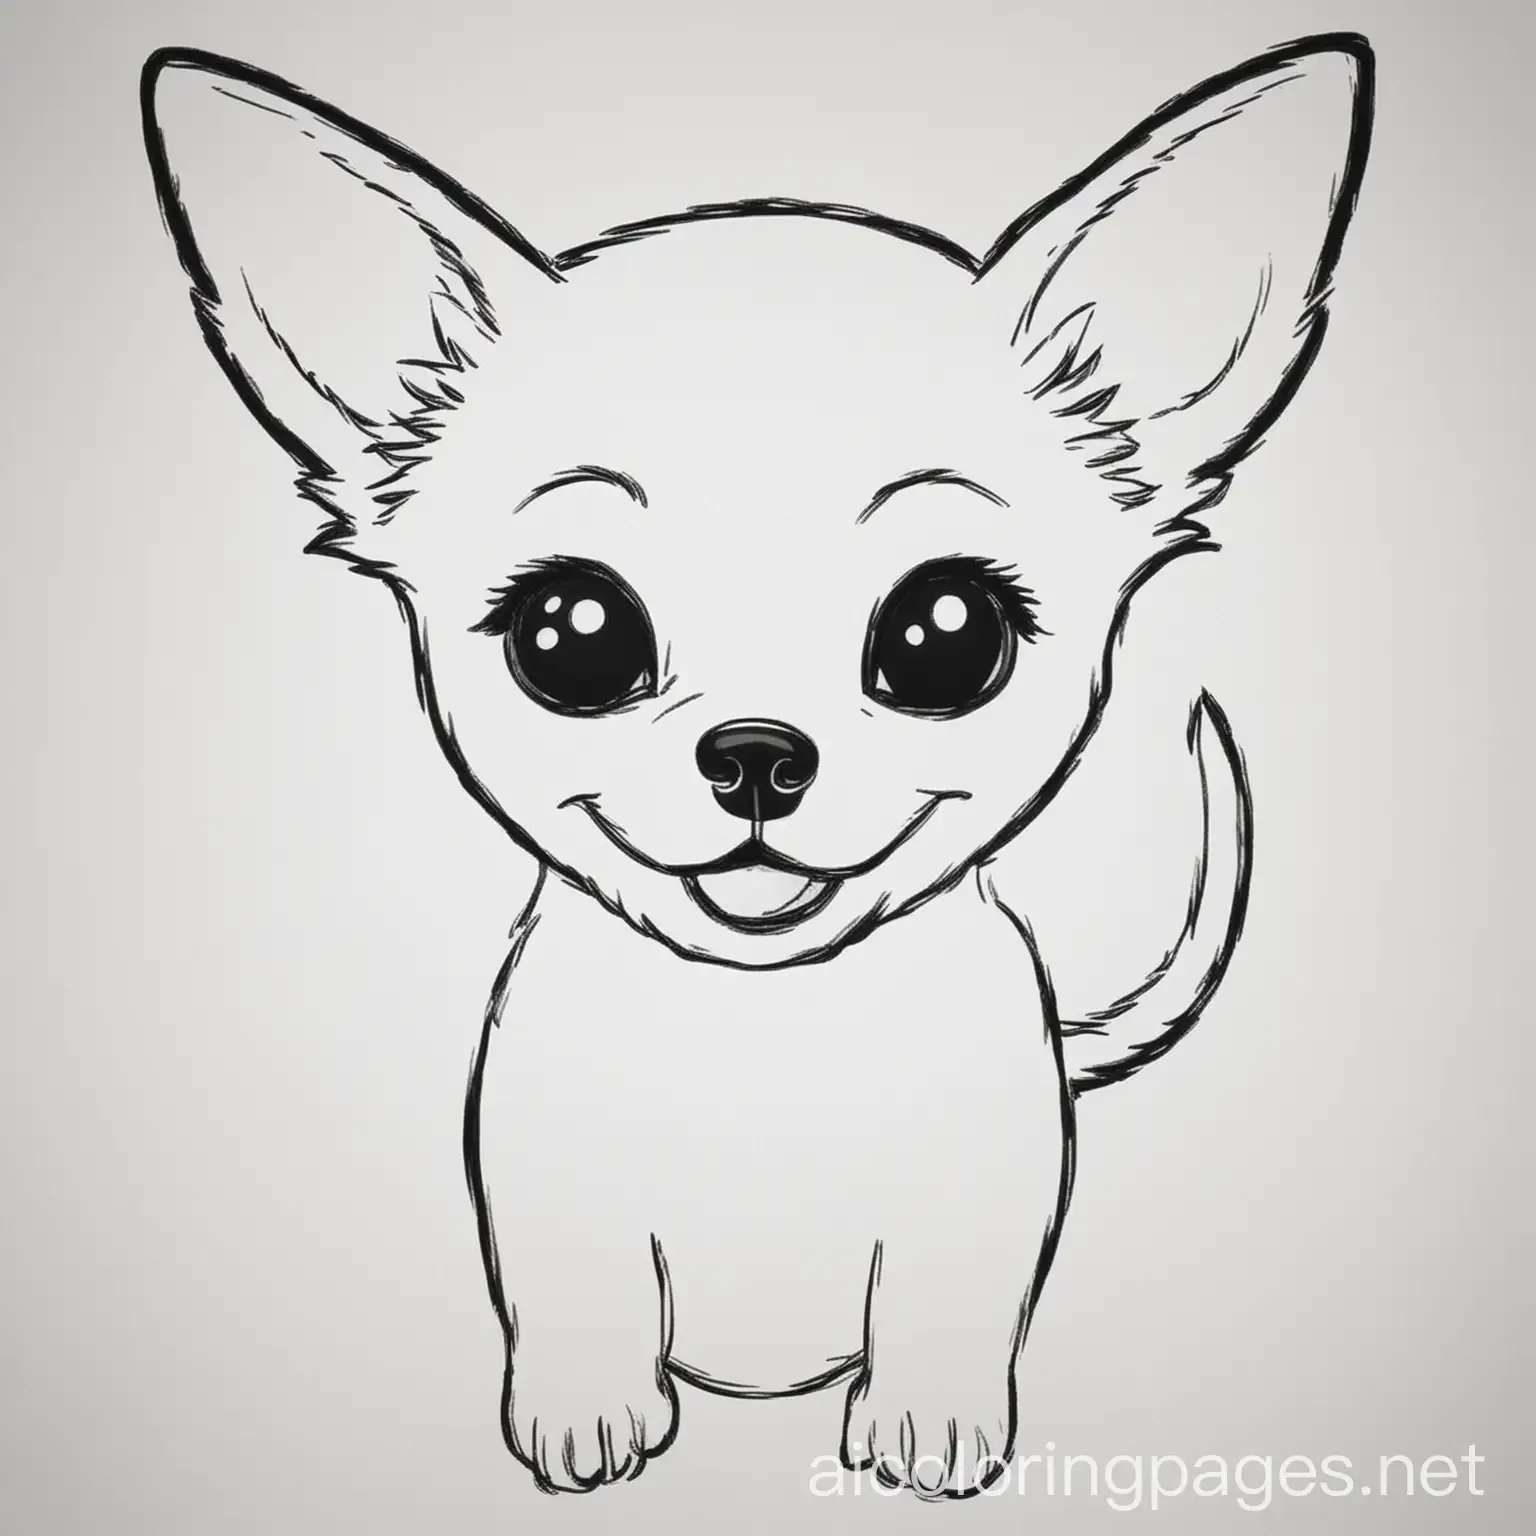 smiling chihuahua coloring page, Coloring Page, black and white, line art, white background, Simplicity, Ample White Space. The background of the coloring page is plain white to make it easy for young children to color within the lines. The outlines of all the subjects are easy to distinguish, making it simple for kids to color without too much difficulty